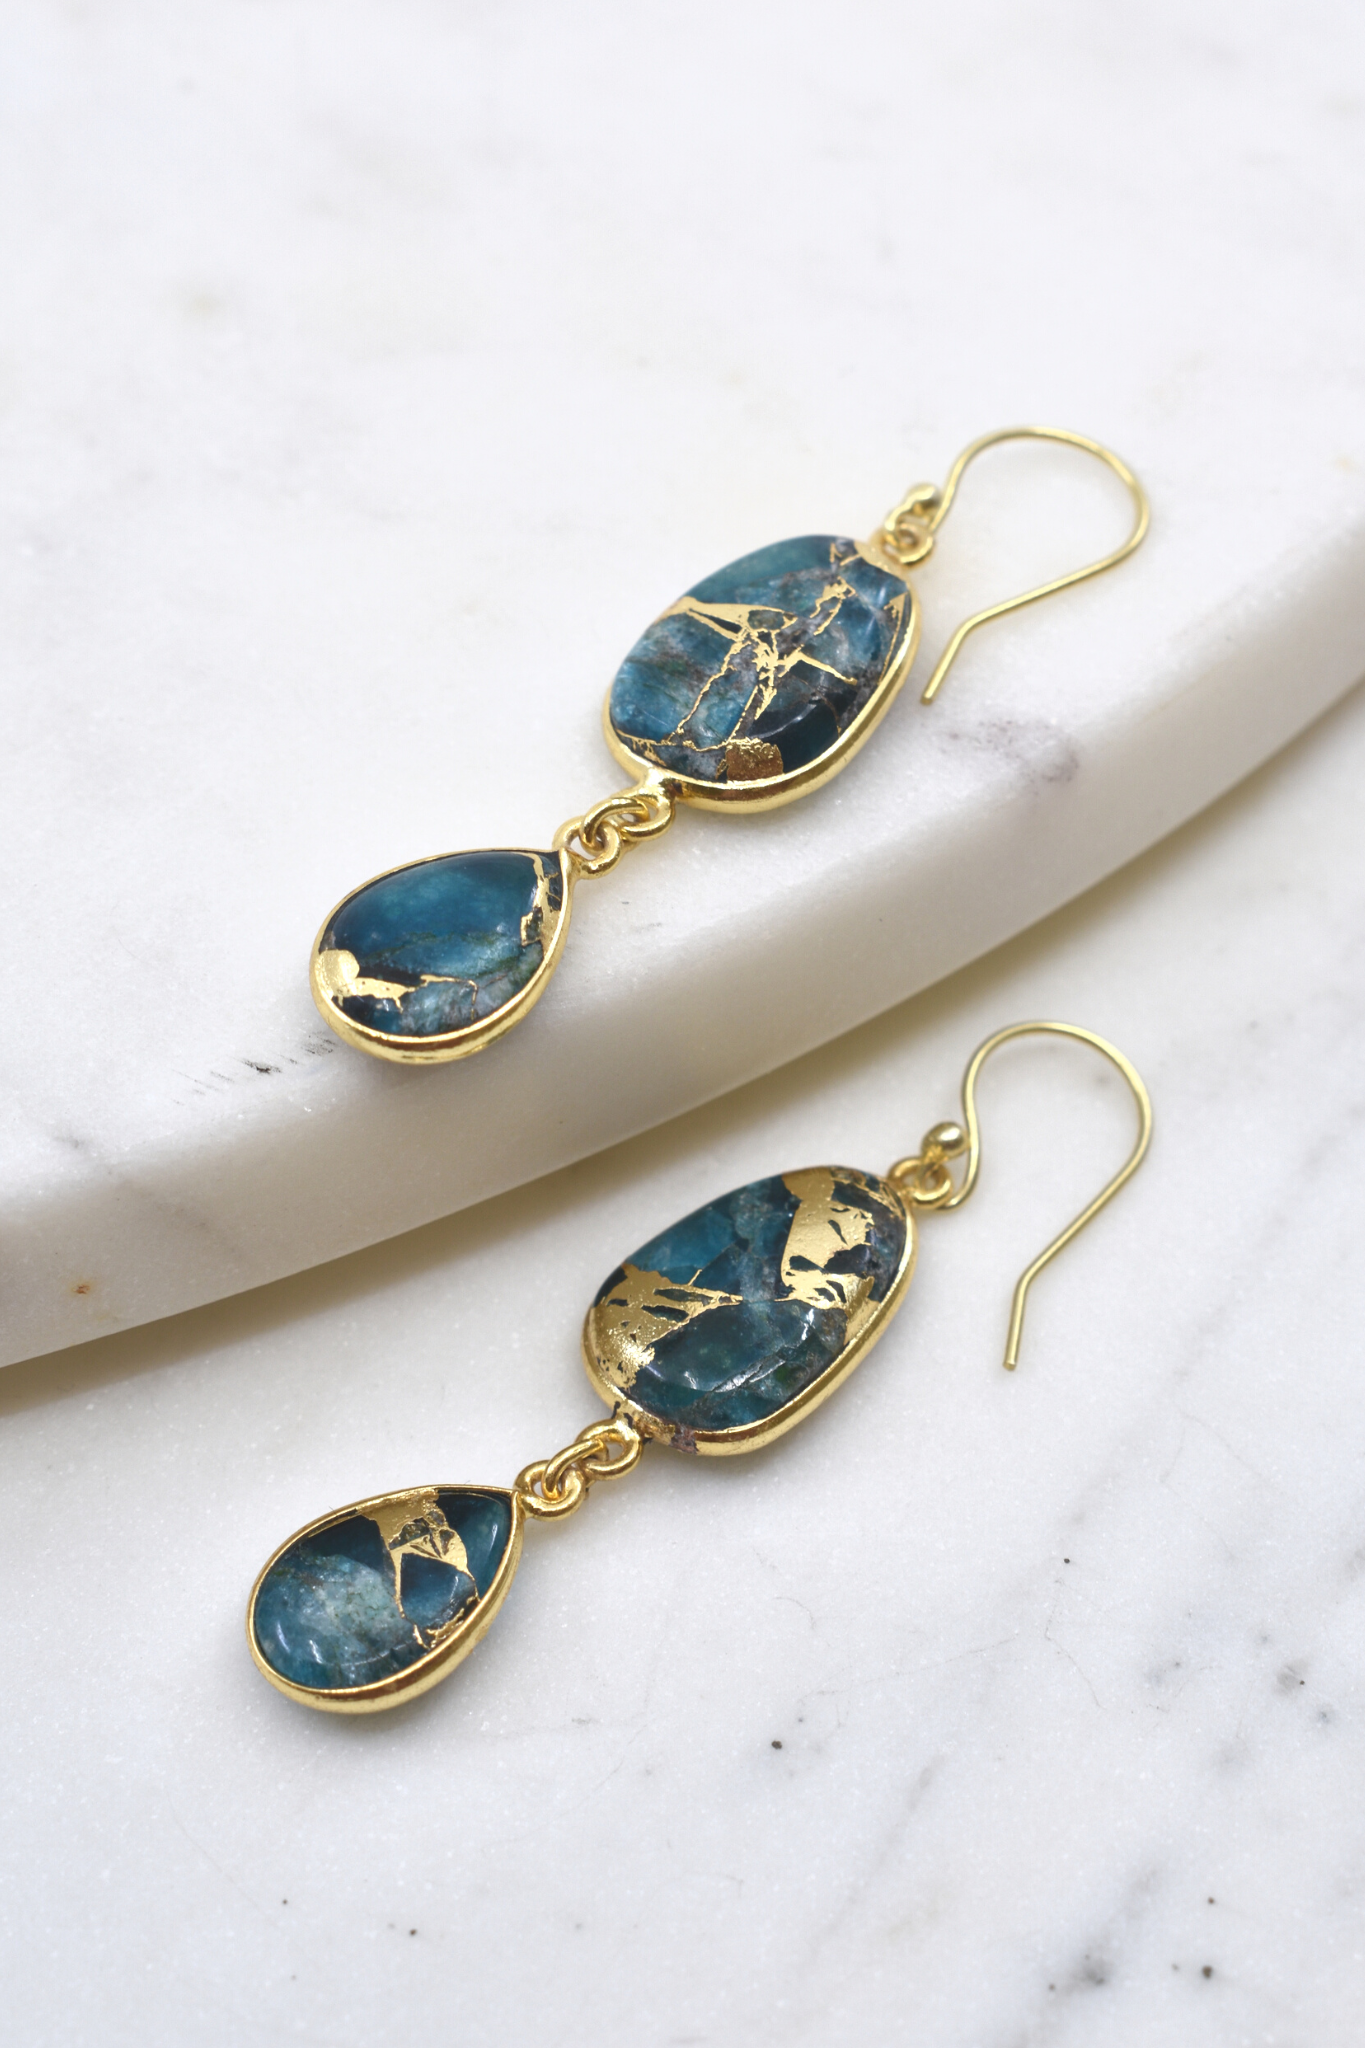 Rome Earrings in Teal Mojave Copper Turquoise